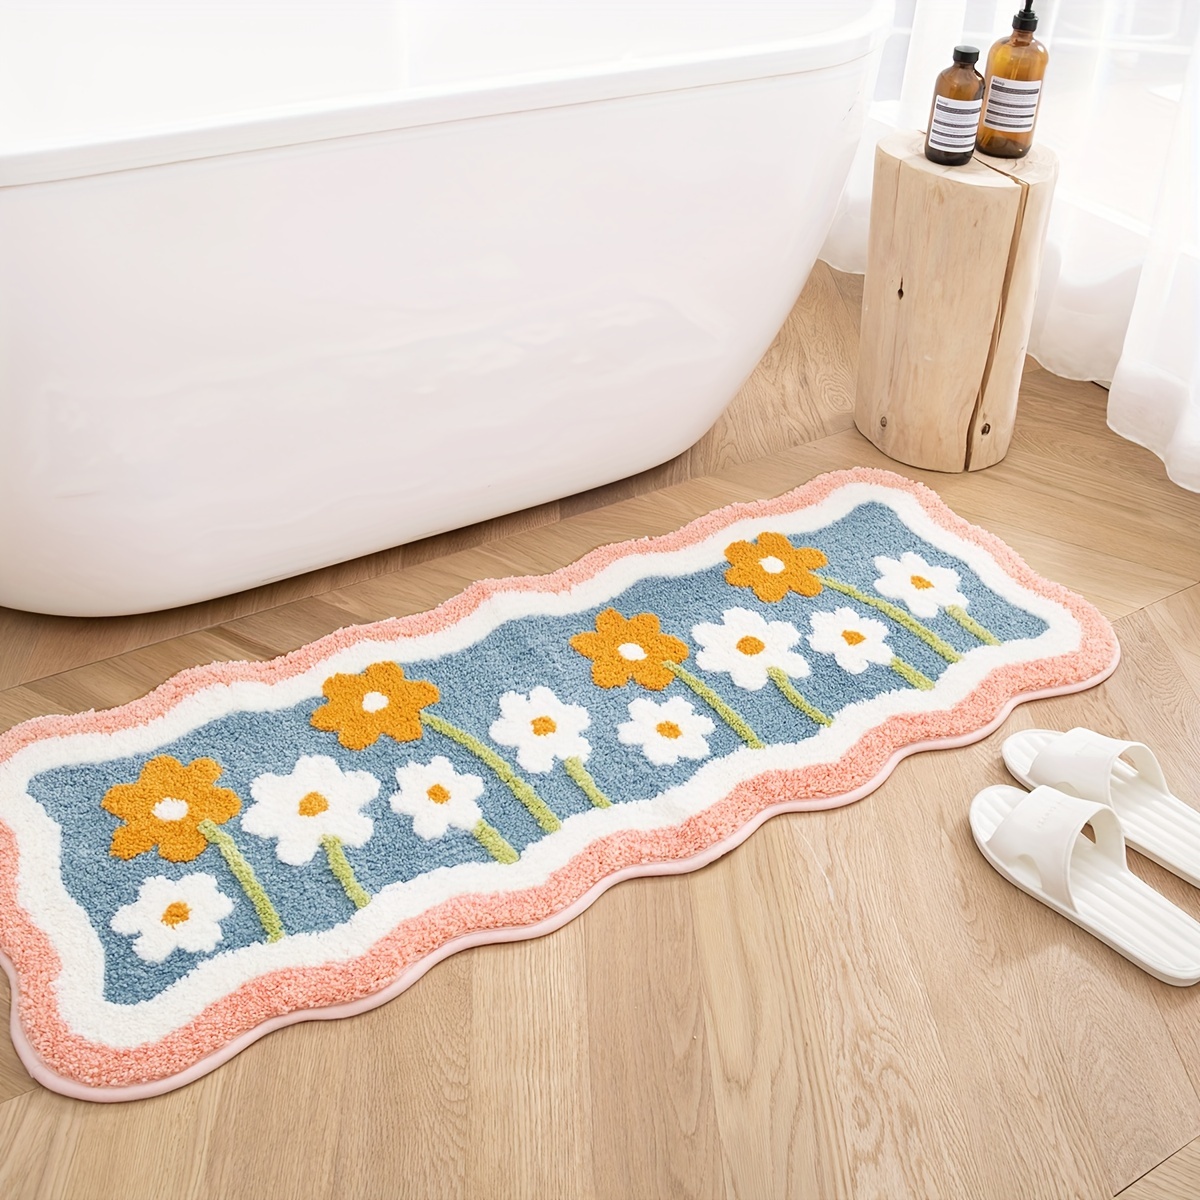 23.6in Smiley Face Rug Sunflower Cute Bath Mat Strong Water Absorption  Super Absorbent And Fluffy Machine Washable Bahtub Mats For Shower, Tub,  Bedroo